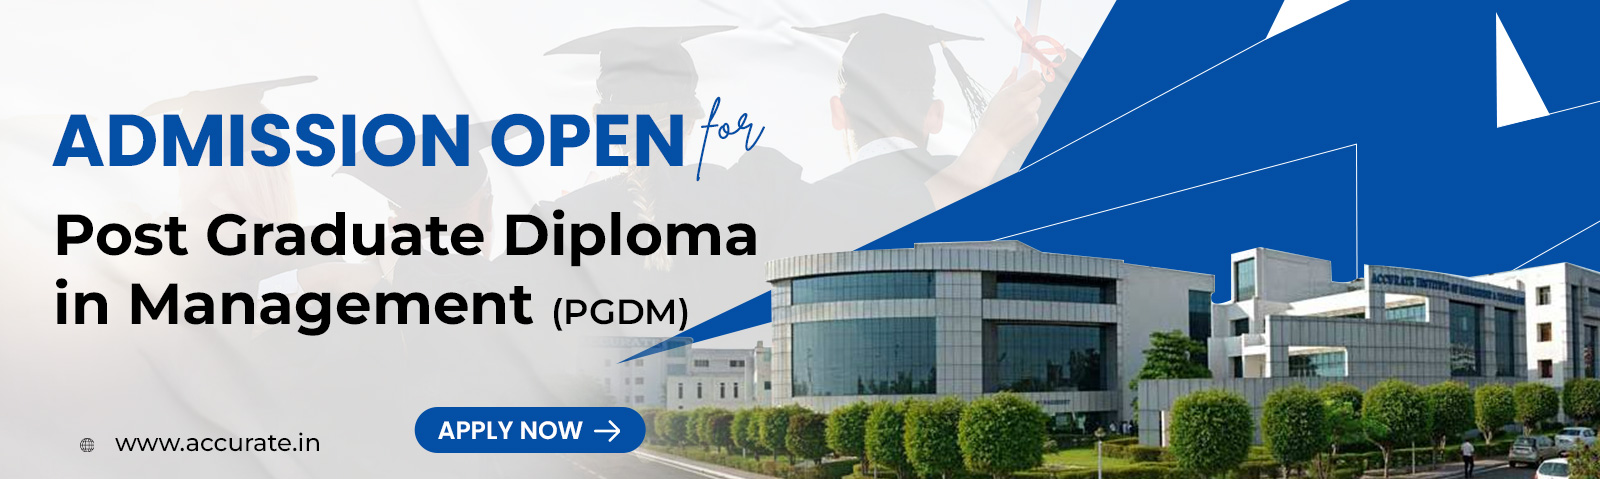 Apply Now for PGDM Admission